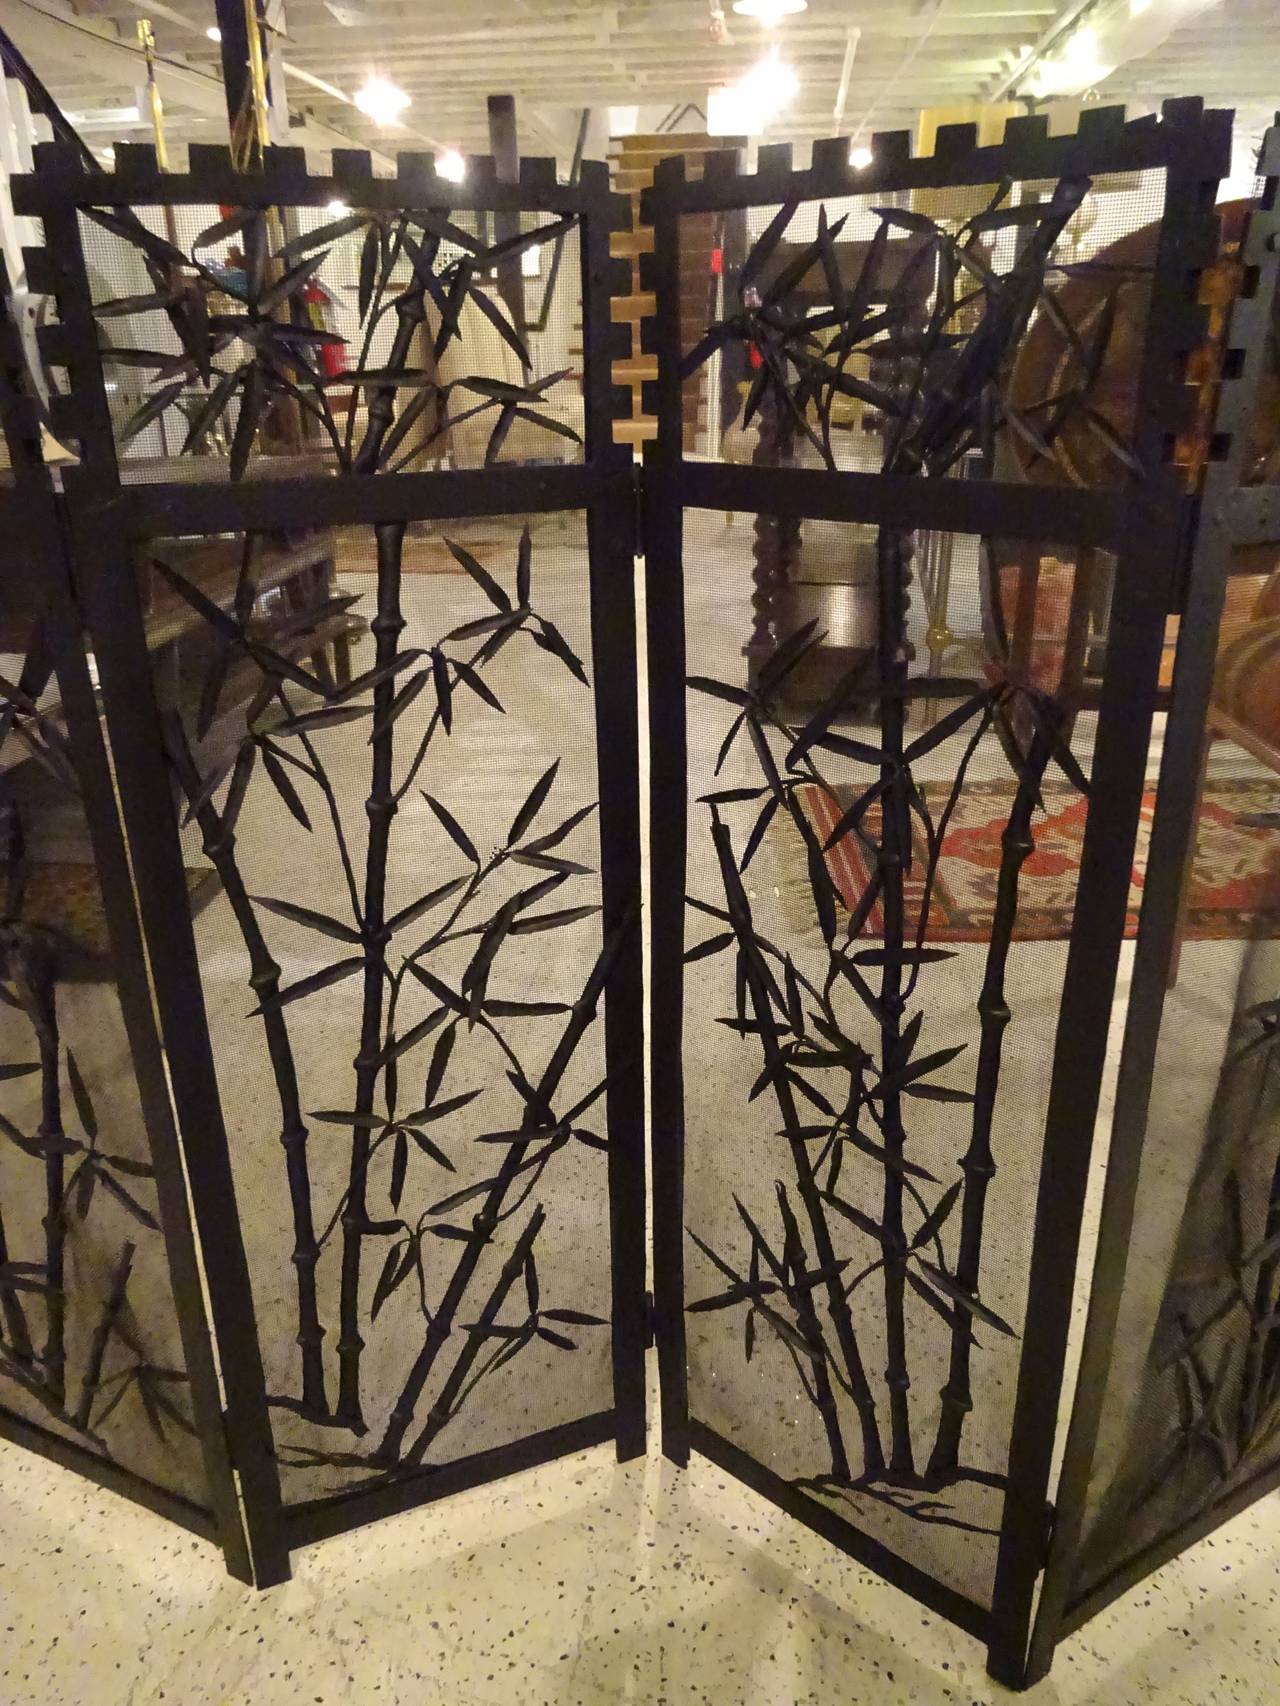 Aesthetic Bamboo Motif Fire Screen, Consisting of four sections of fine wrought iron work, in the Japanese taste